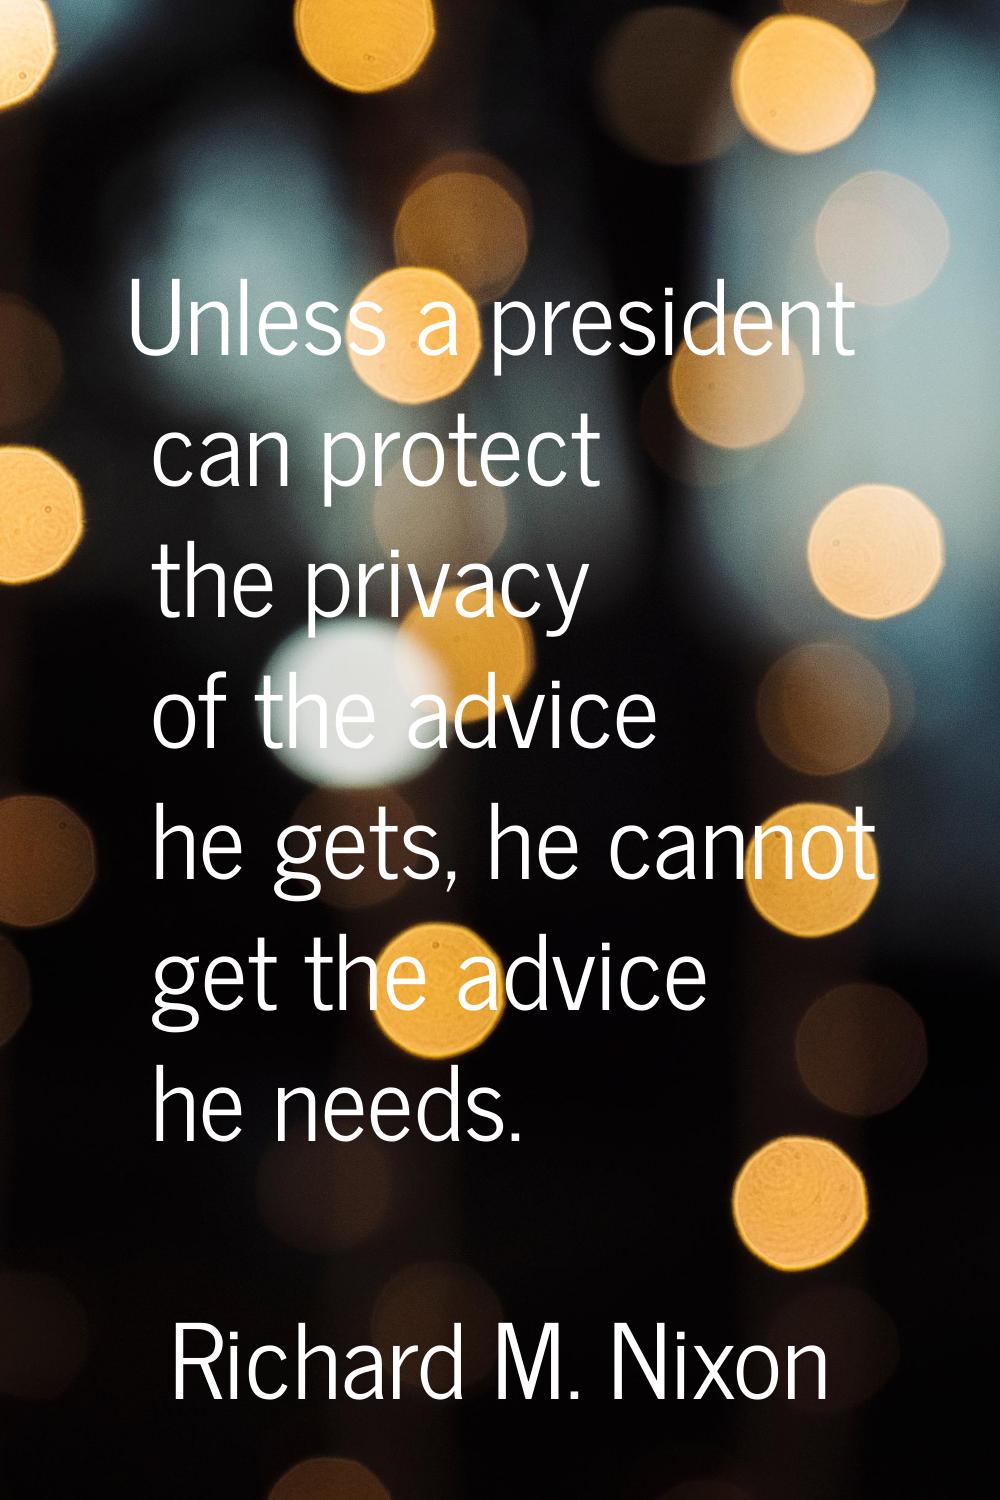 Unless a president can protect the privacy of the advice he gets, he cannot get the advice he needs